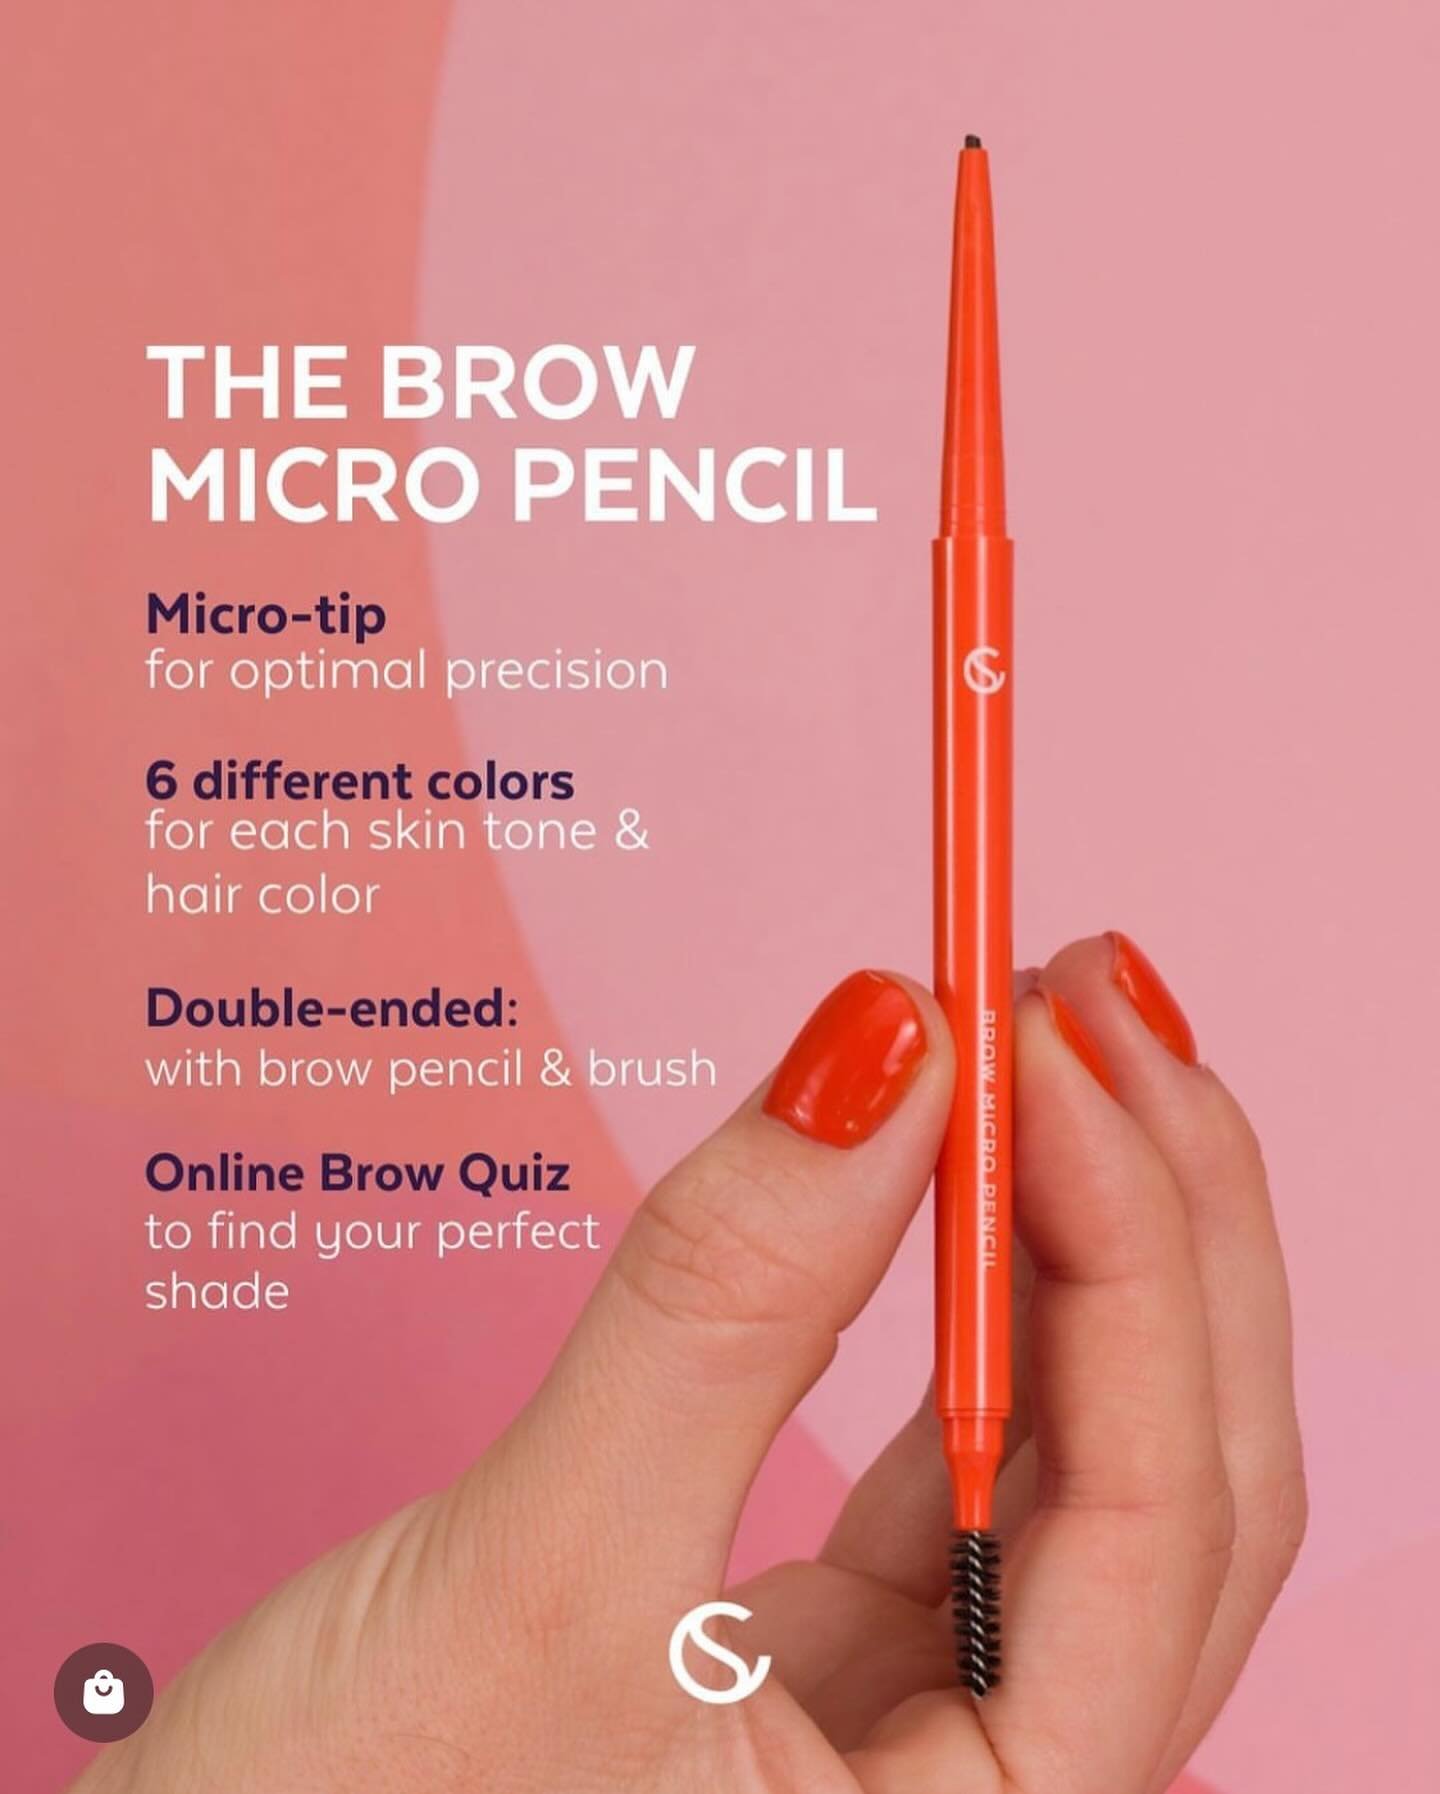 Micro brow pencil

Fills and defines every desired brow shape easily.
Available in 6 various shades.
Waterproof and long-wear formula.
Just twist, no sharpener needed.
With built-in spoolie brush.
Introducing Our Brow Micro Pencil- a game-changing to